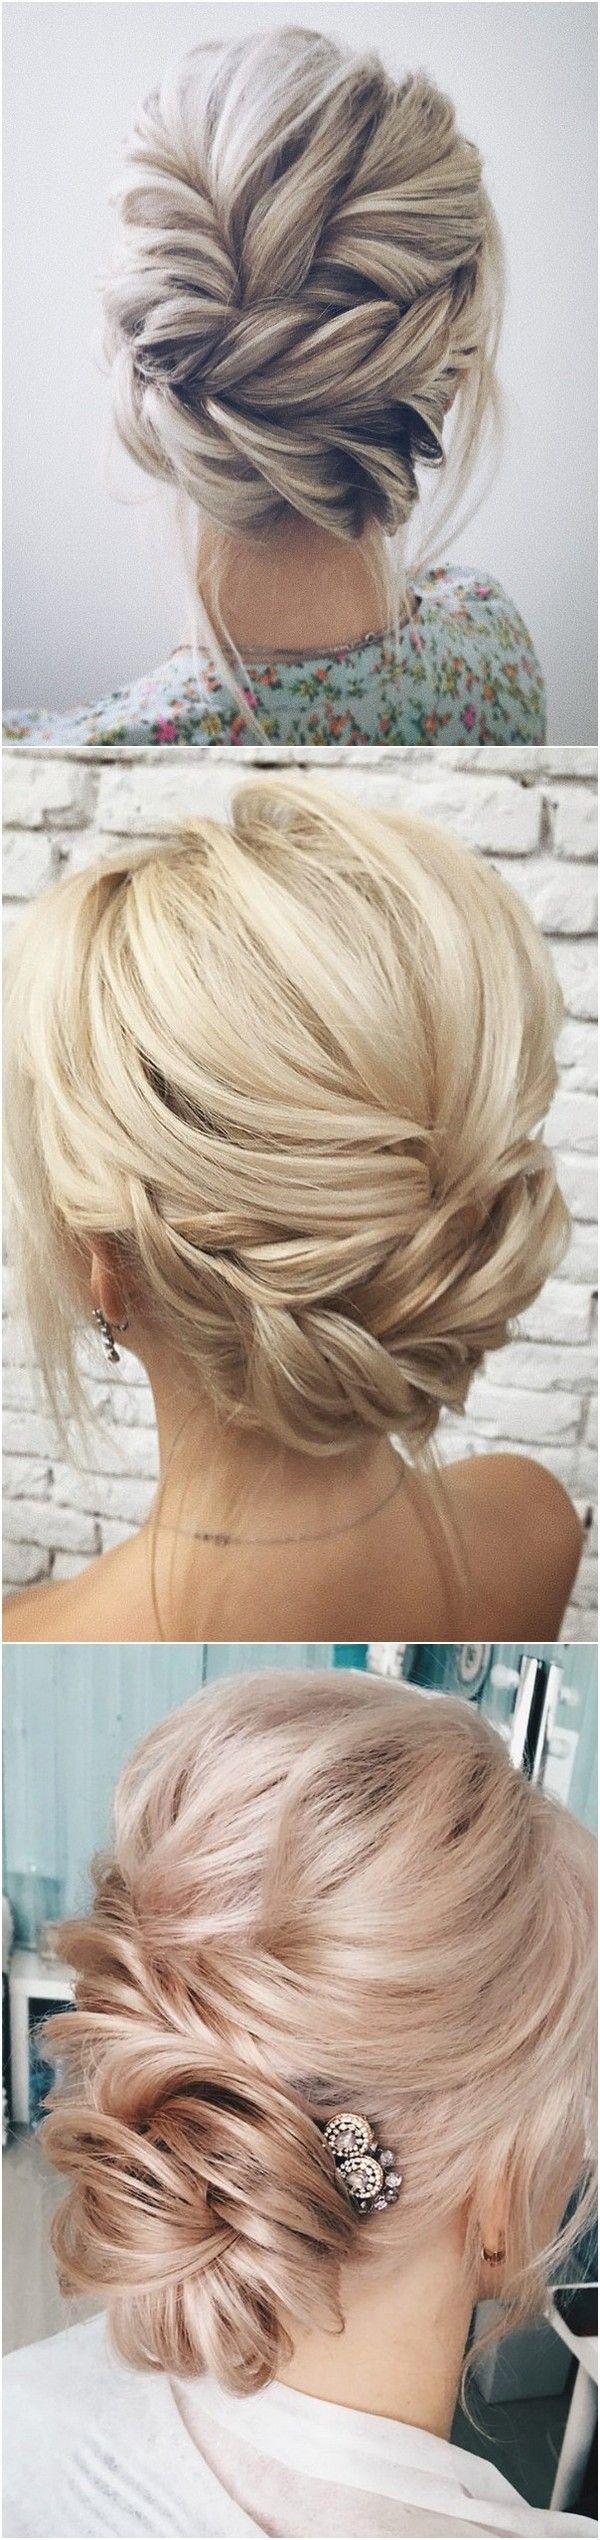 Wedding - 12 Trending Updo Wedding Hairstyles From Instagram - Page 2 Of 2